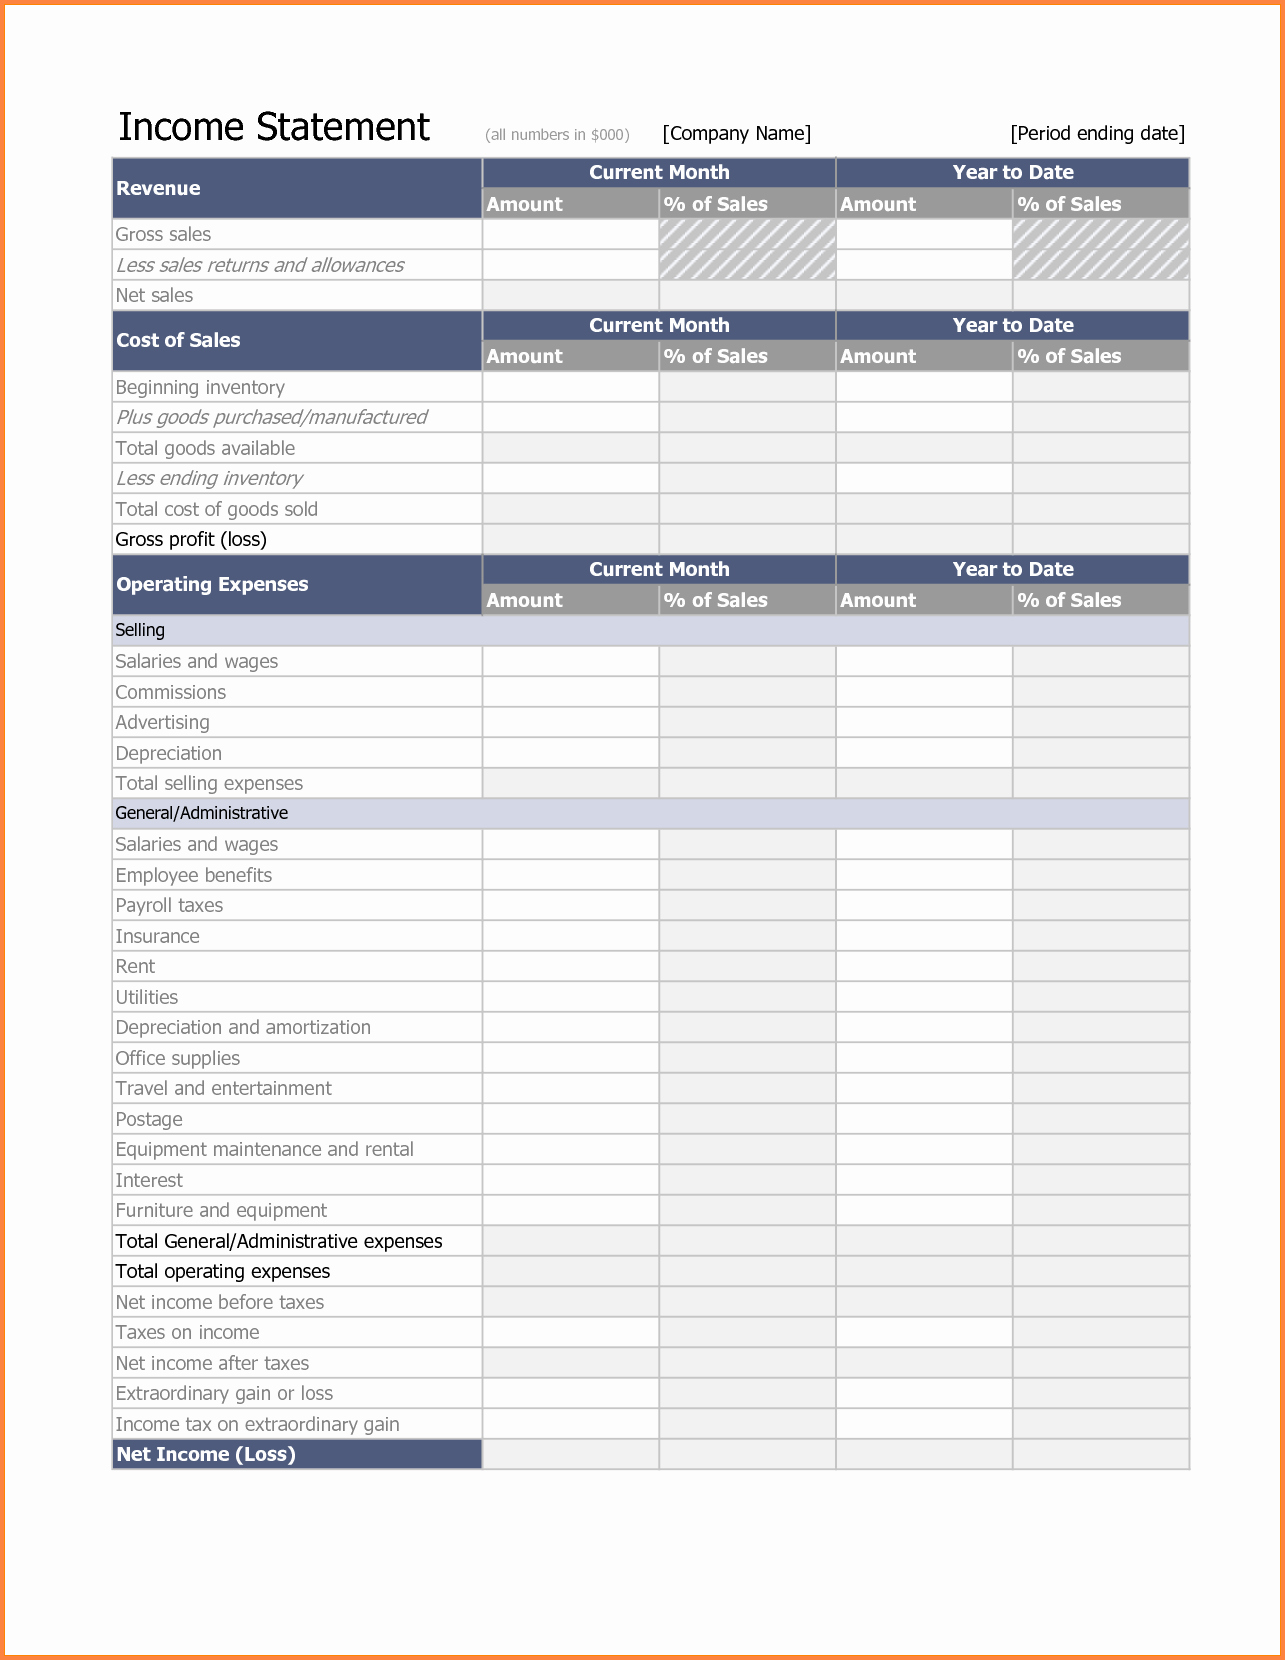 Microsoft Excel Income Statement Template Elegant 10 In E Statement Template Excel